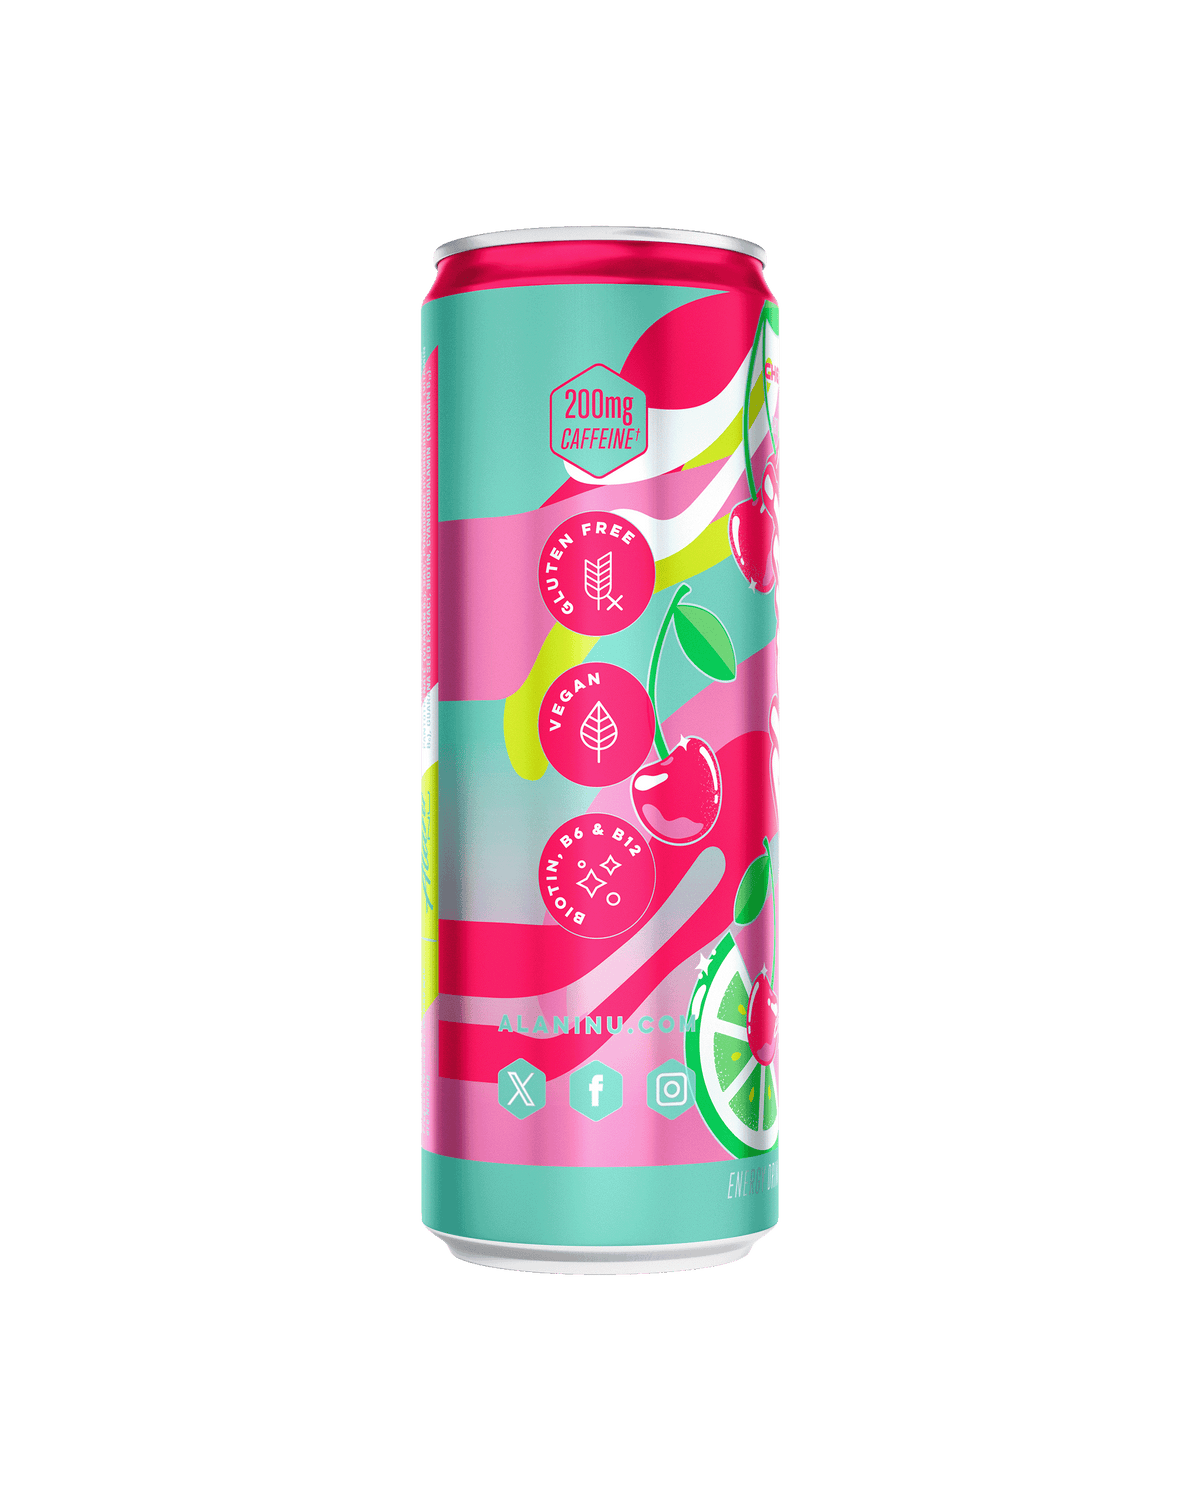 A side image of Energy Drink in flavor Cherry Twist.